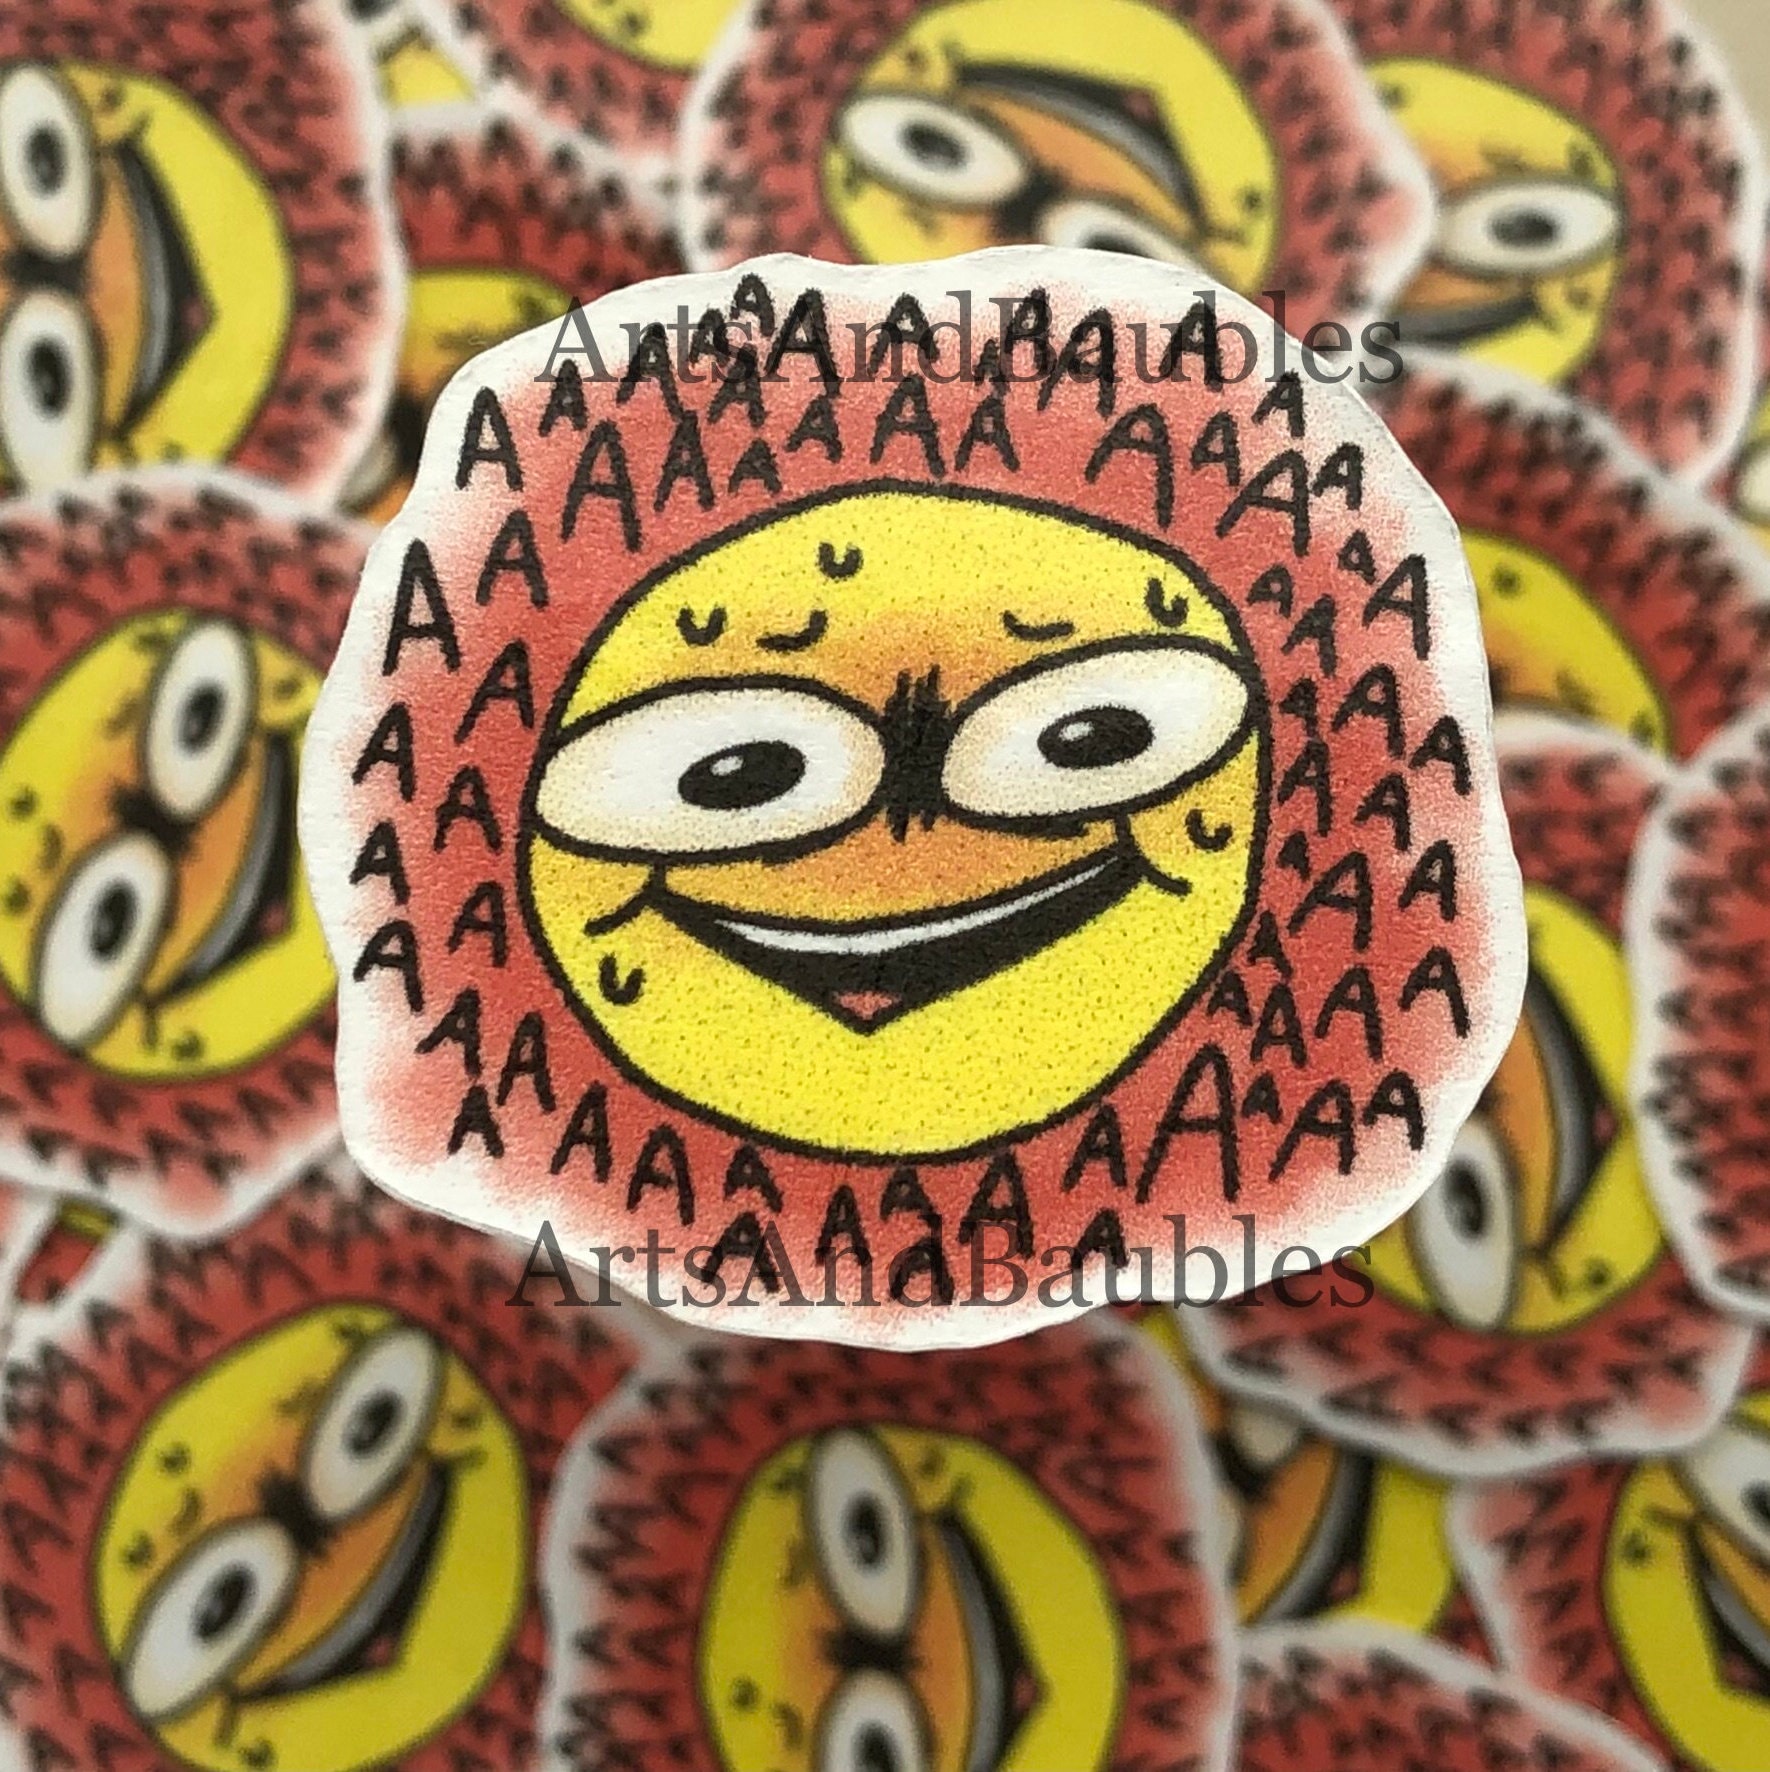 Cursed Emojis Sticker for Sale by gsill